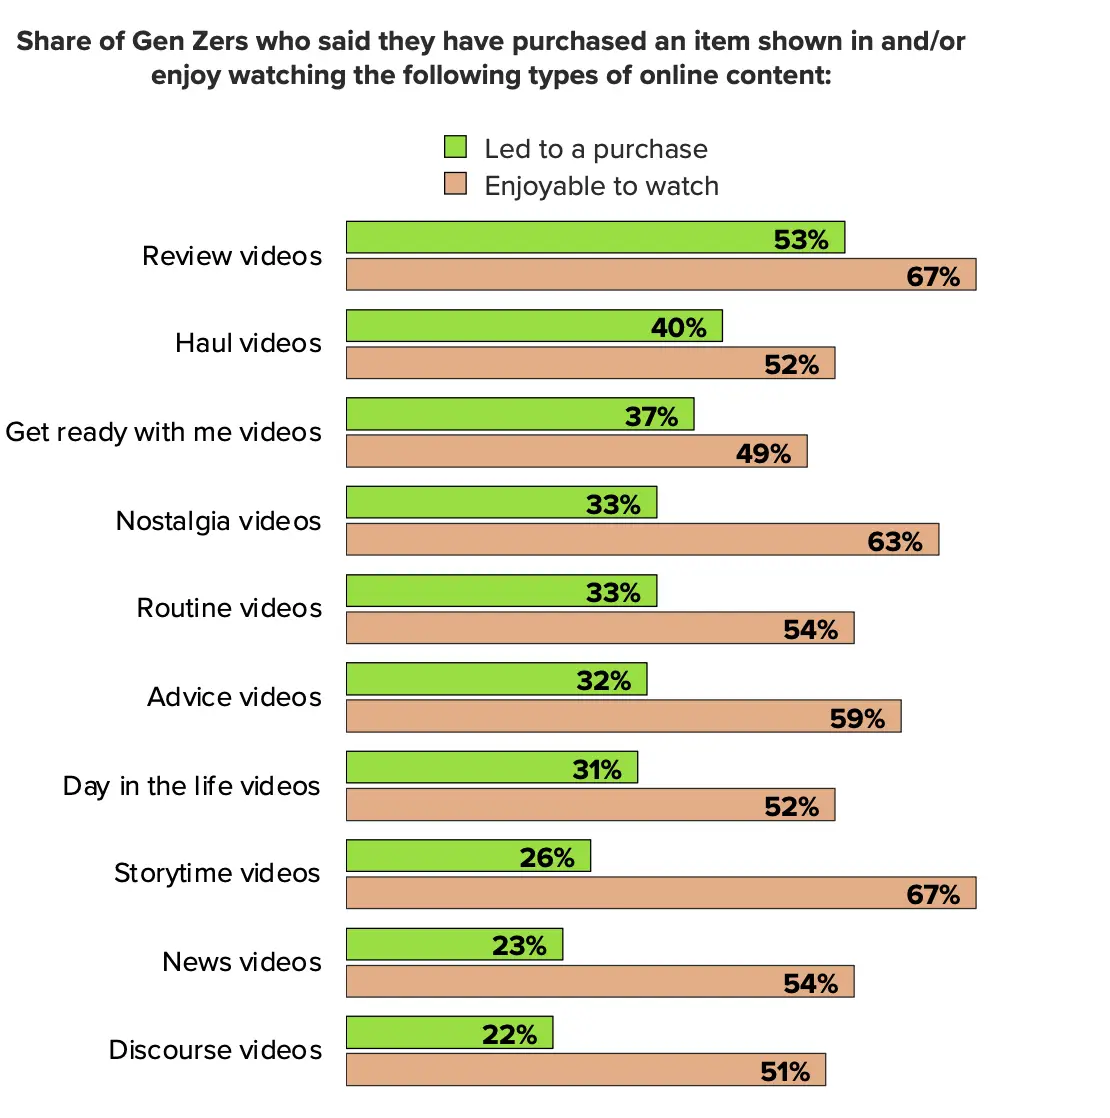 Horizontal bar chart with green and orange bars showing led to purchase or enjoyable to watch for Gen Z watching the following types of online content.